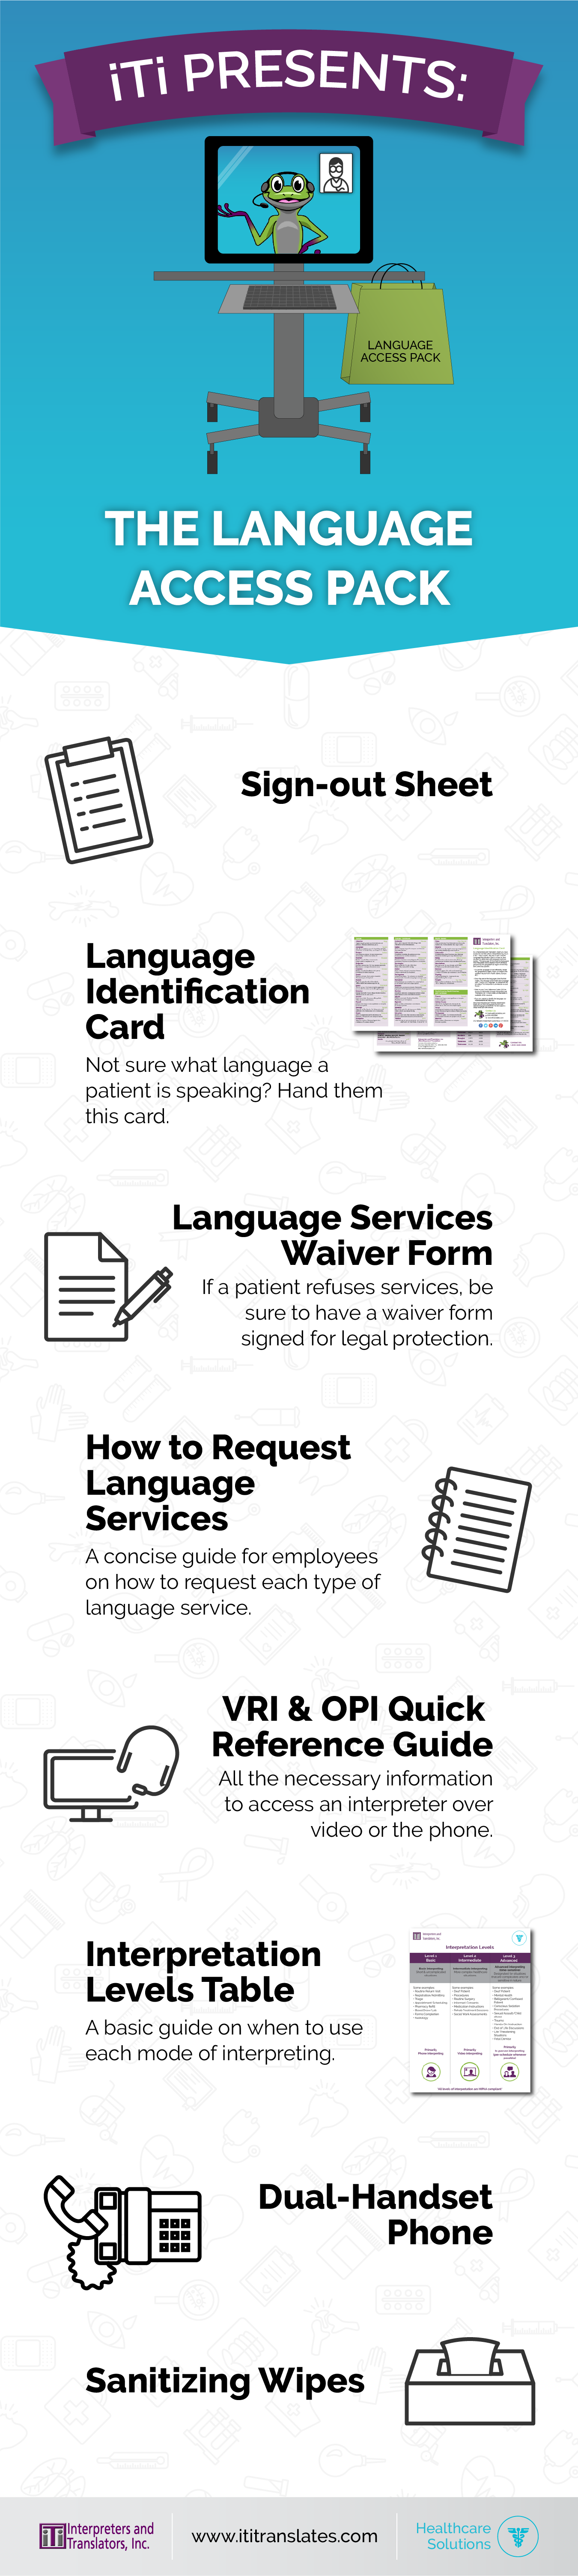 Language access pack, what to include, infographic